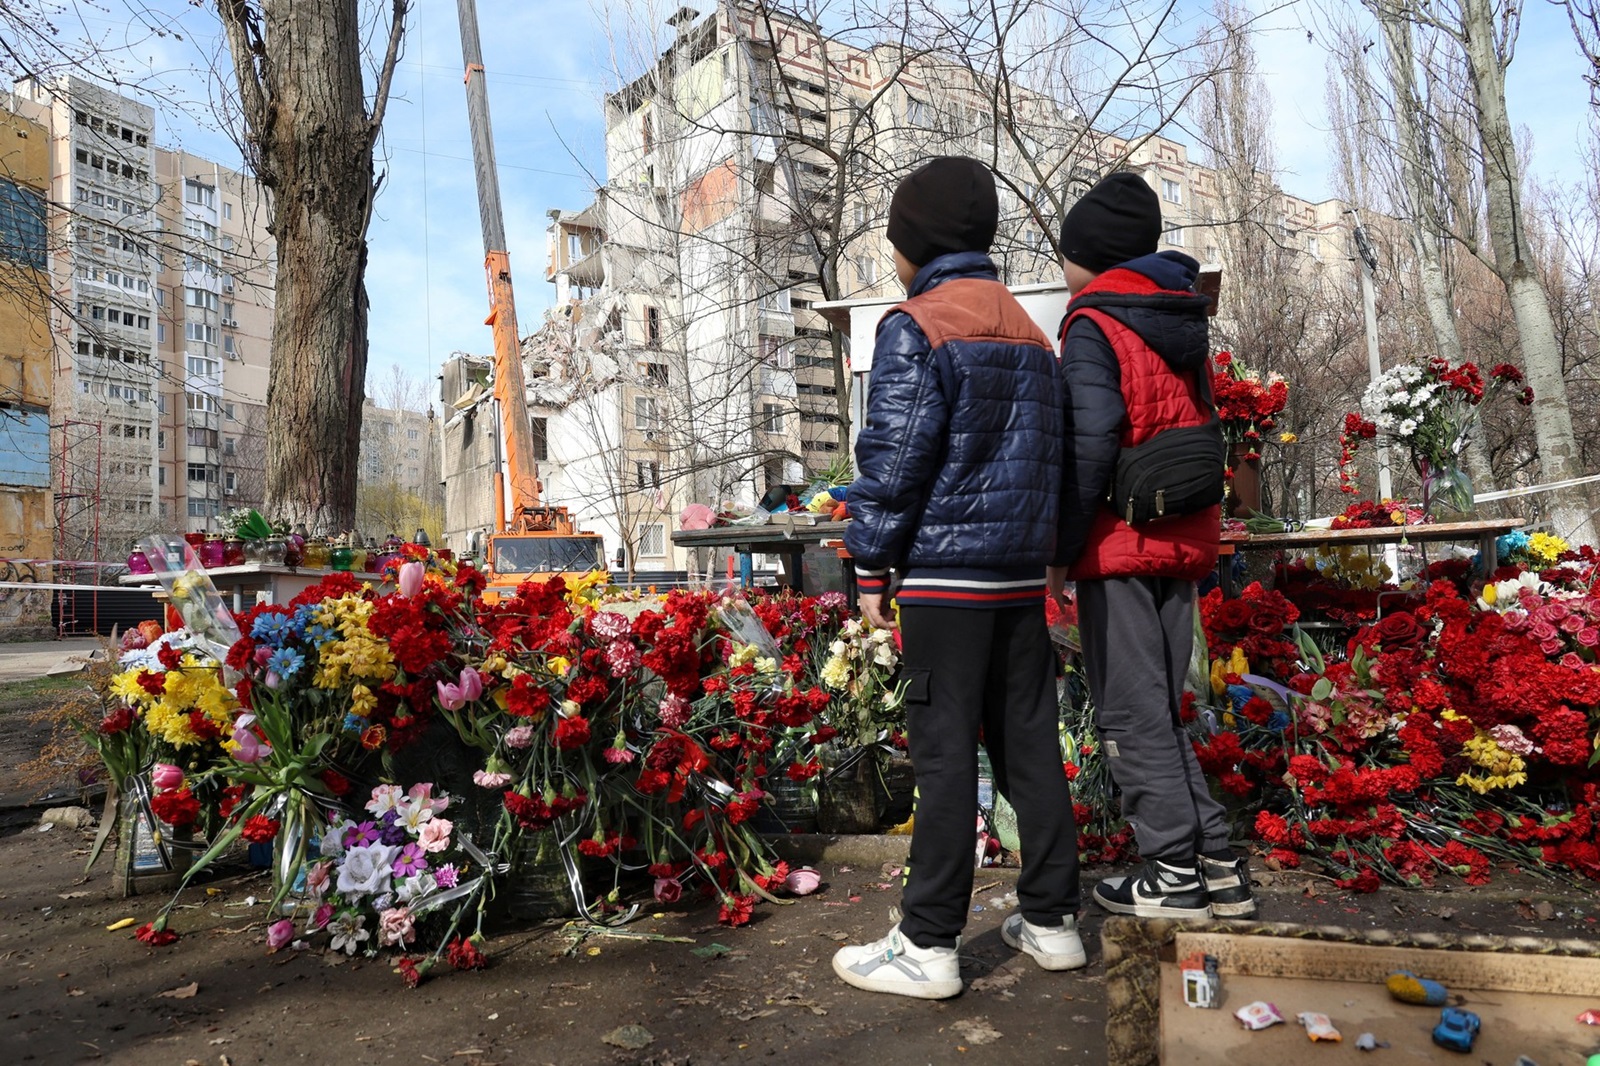 Non Exclusive: ODESA, UKRAINE - MARCH 27, 2024 - Boys stand by the heaps of flowers brought by people to the site of the tragedy as part of the section of a 9-story residential building on Dobrovolskoho Avenue collapsed, hit by a Russian drone on March 2, the dismantling works are underway, Odesa, southern Ukraine.,Image: 860480439, License: Rights-managed, Restrictions: This photo cannot be distributed in the Russian Federation. MANDATORY CREDIT OR DOUBLE FEE WILL BE CHARGED - **Strictly no use in repeat online galleries without payment**, Model Release: no, Credit line: / BEEM / Beem / Profimedia